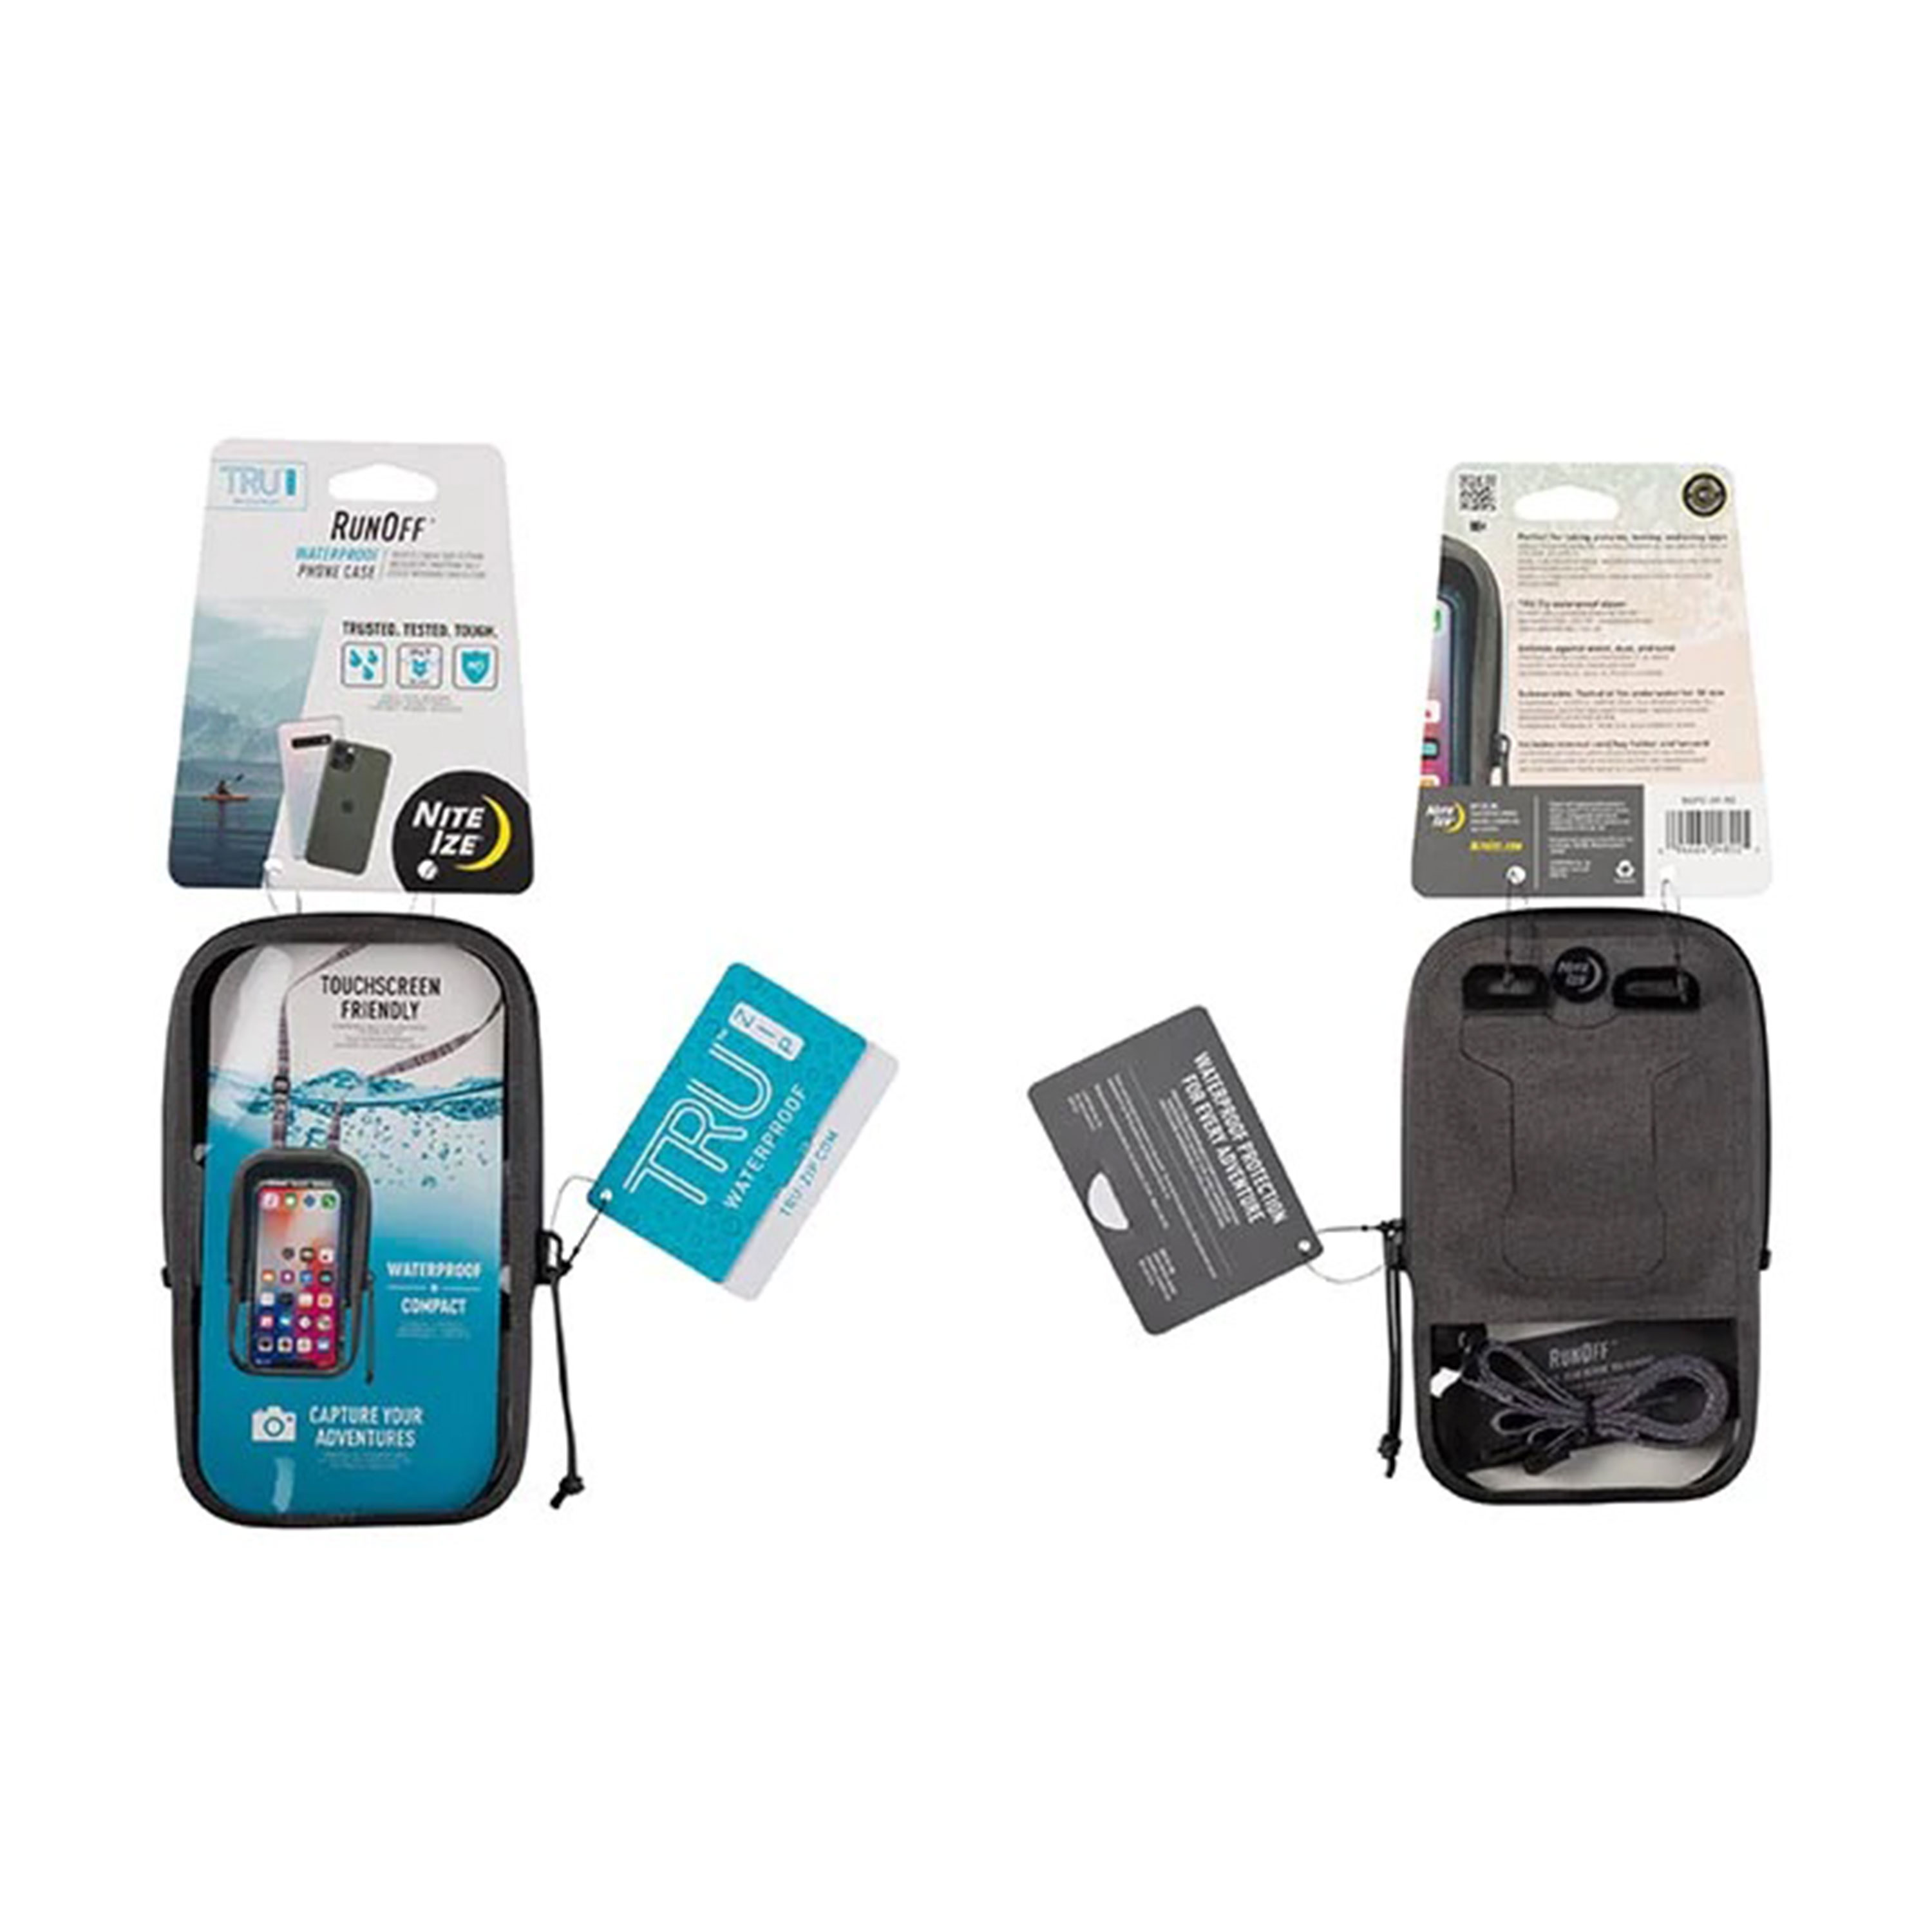 Nite Ize(r) RunOff Waterproof Phone Pouch with Lanyard